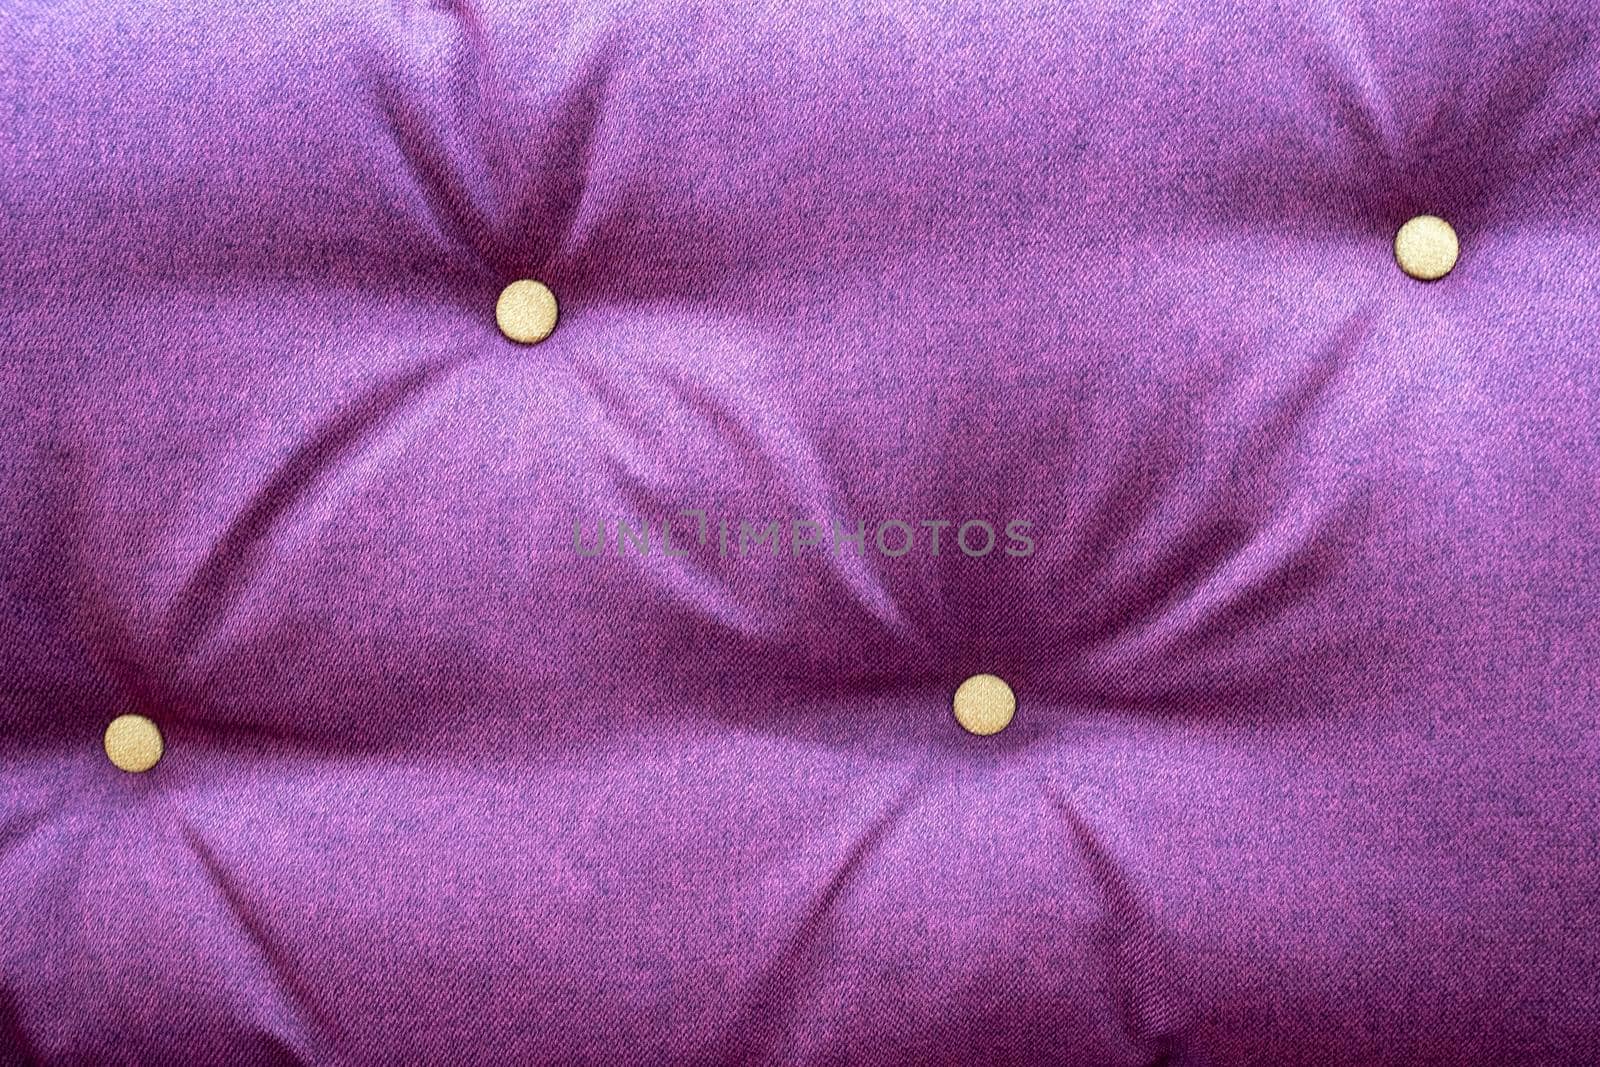 background of burgundy furniture fabric with decorative buttons by audiznam2609